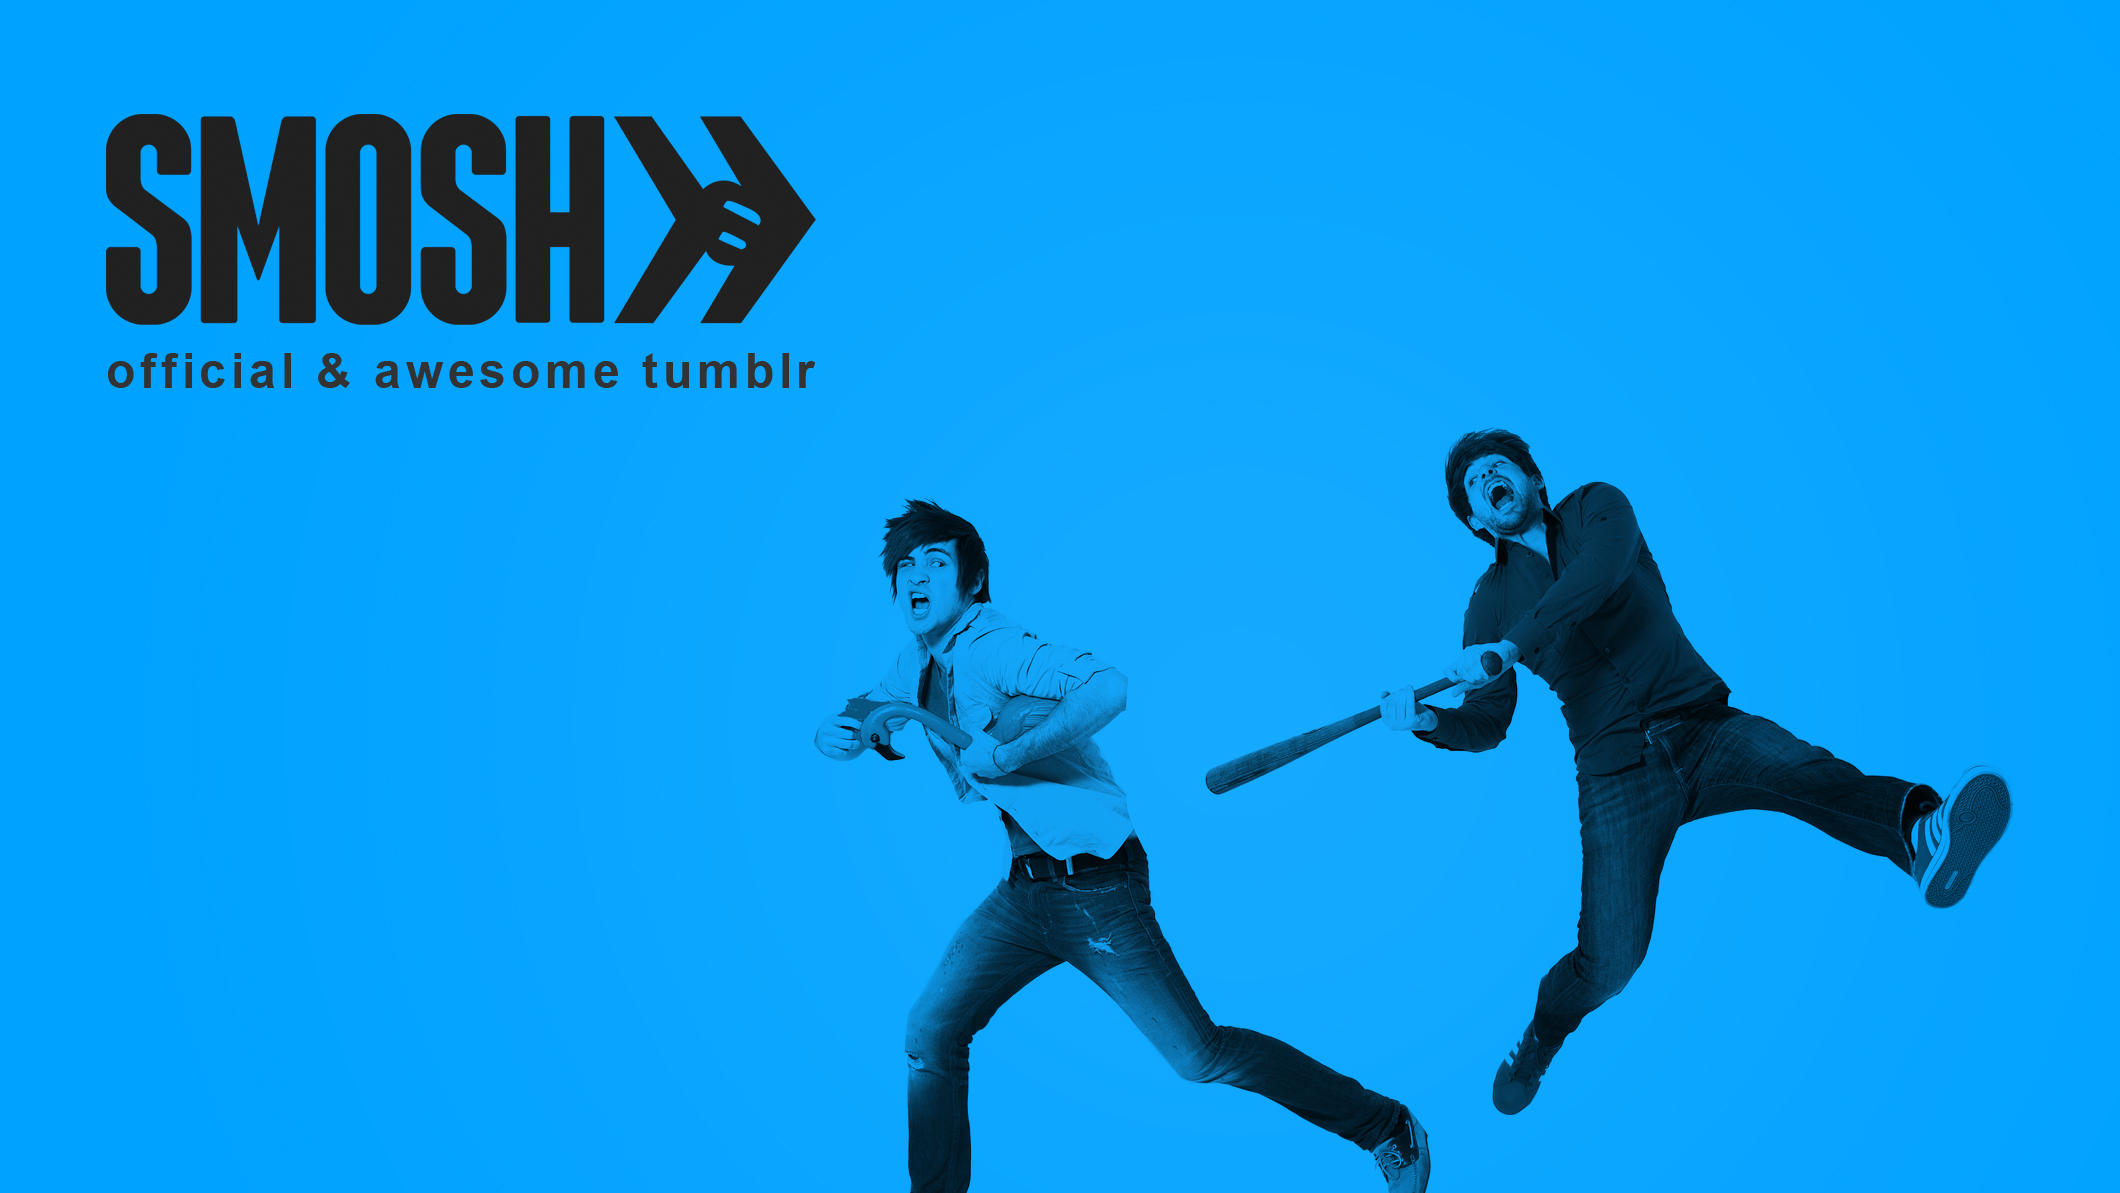 Official Awesome Smosh